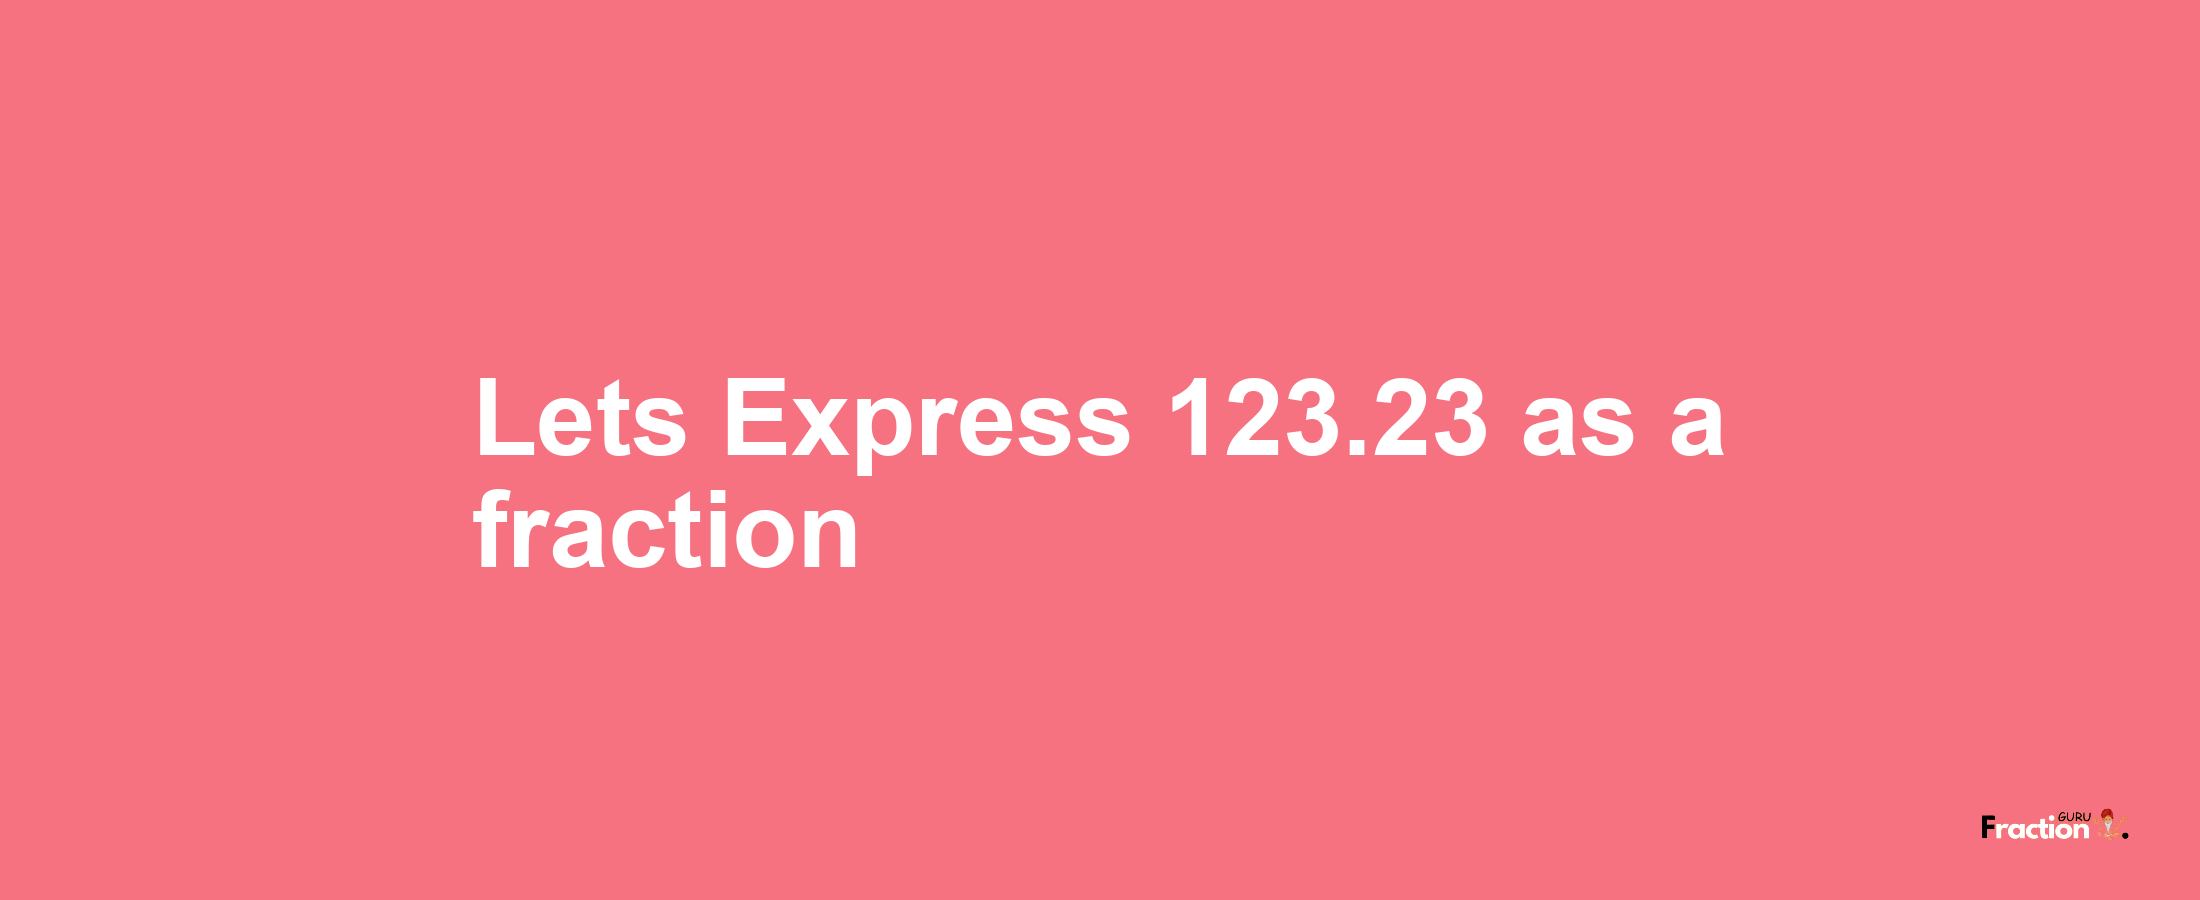 Lets Express 123.23 as afraction